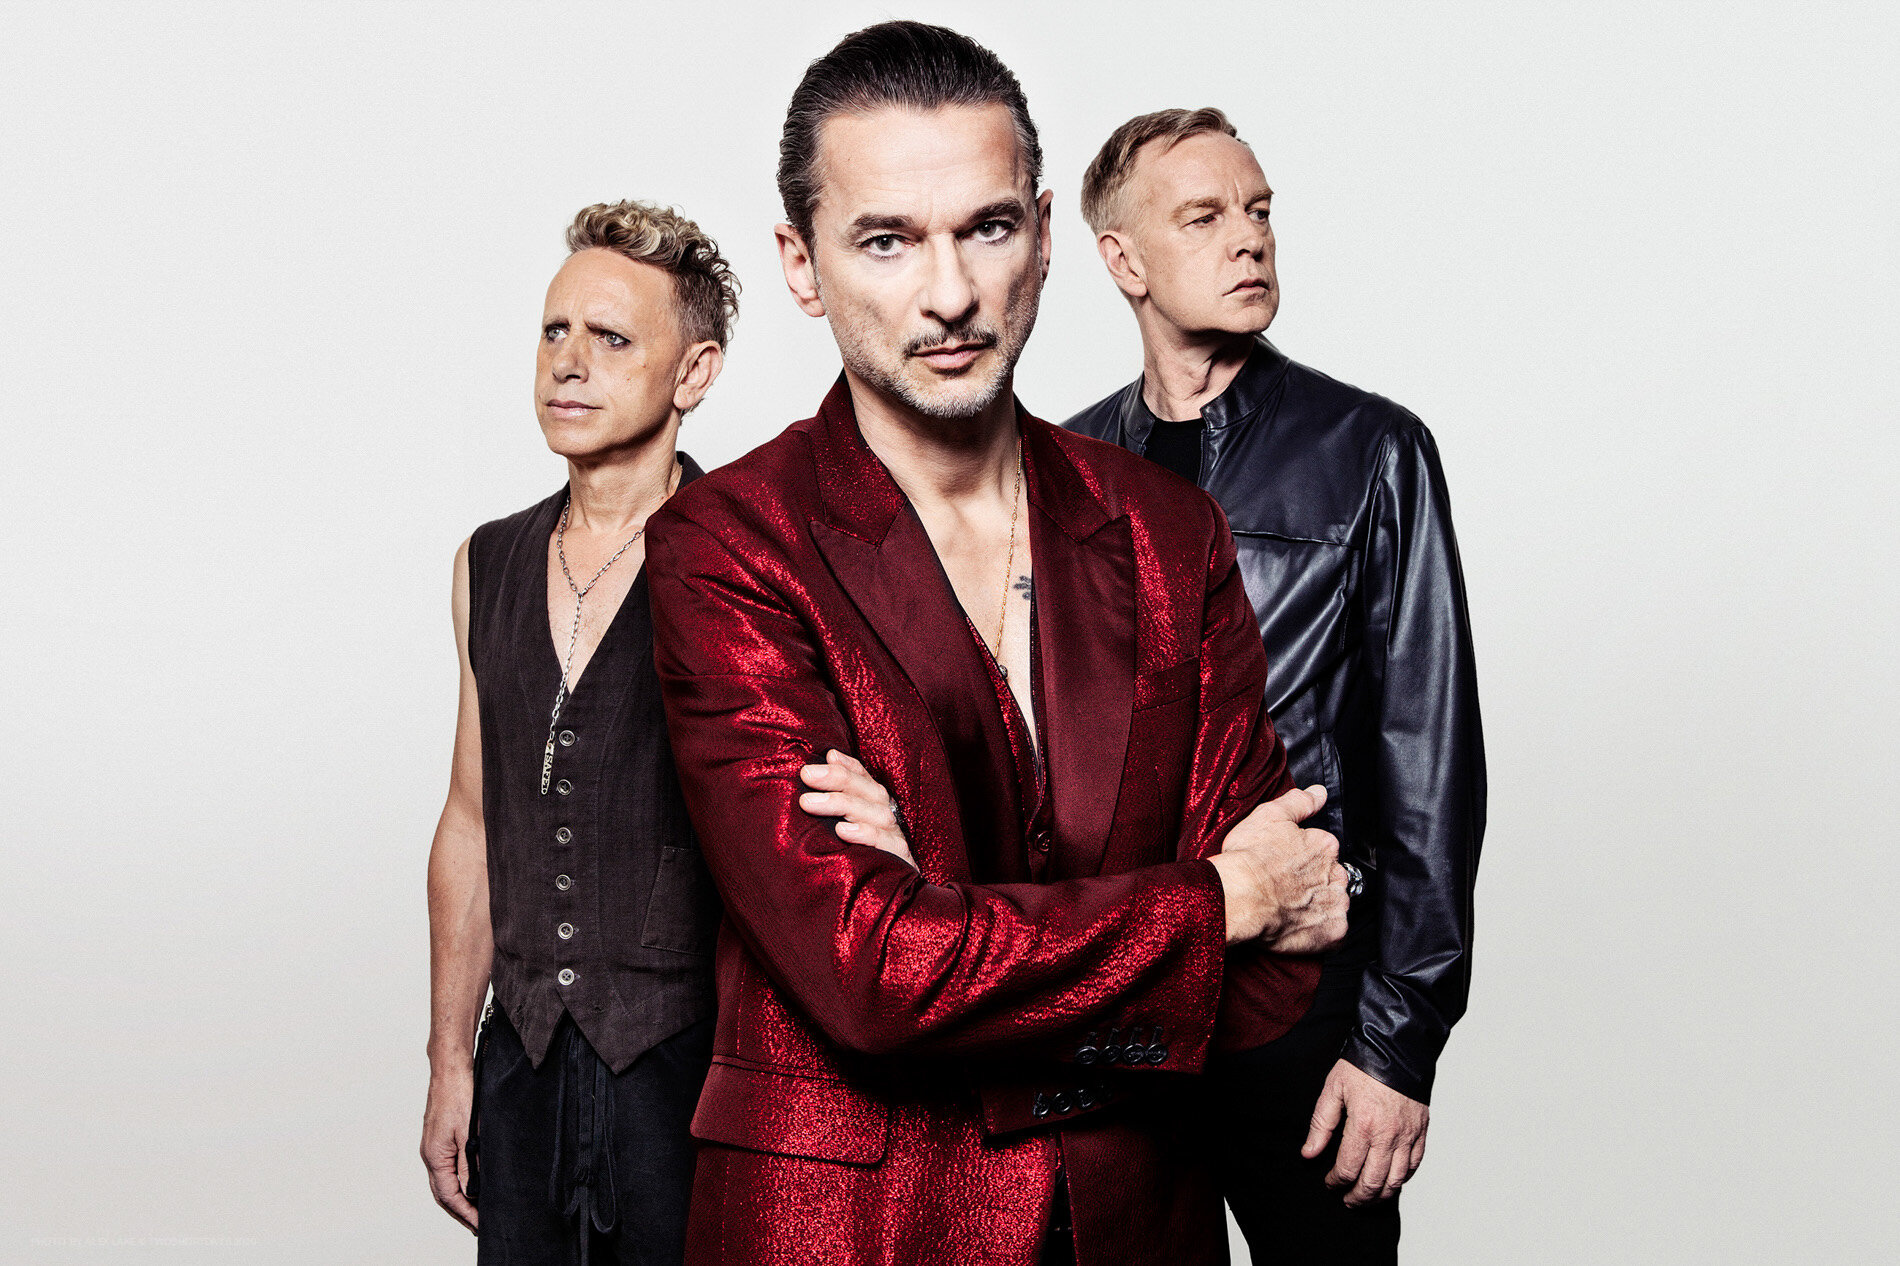 depeche_mode_photography_copyright_ALEX_LAKE_do_not_reproduce_without_permission_TWOSHORTDAYS.jpg